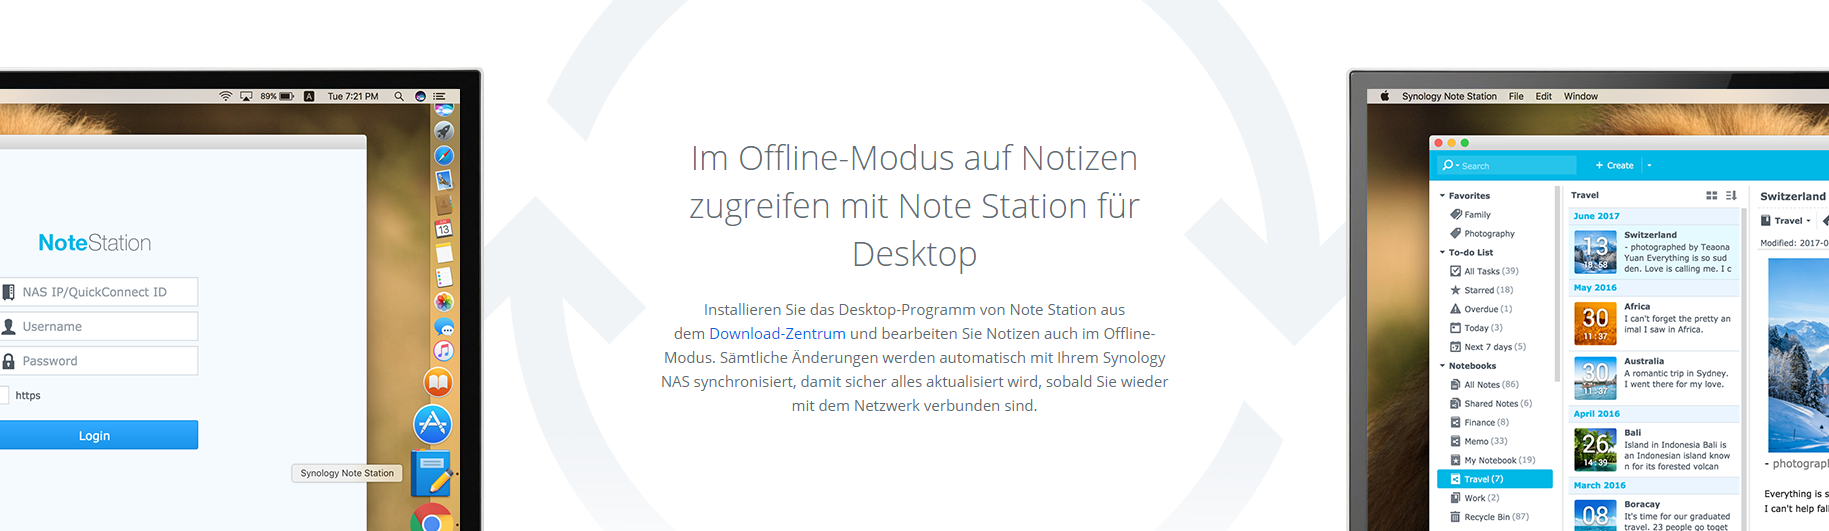 synology_notes_01